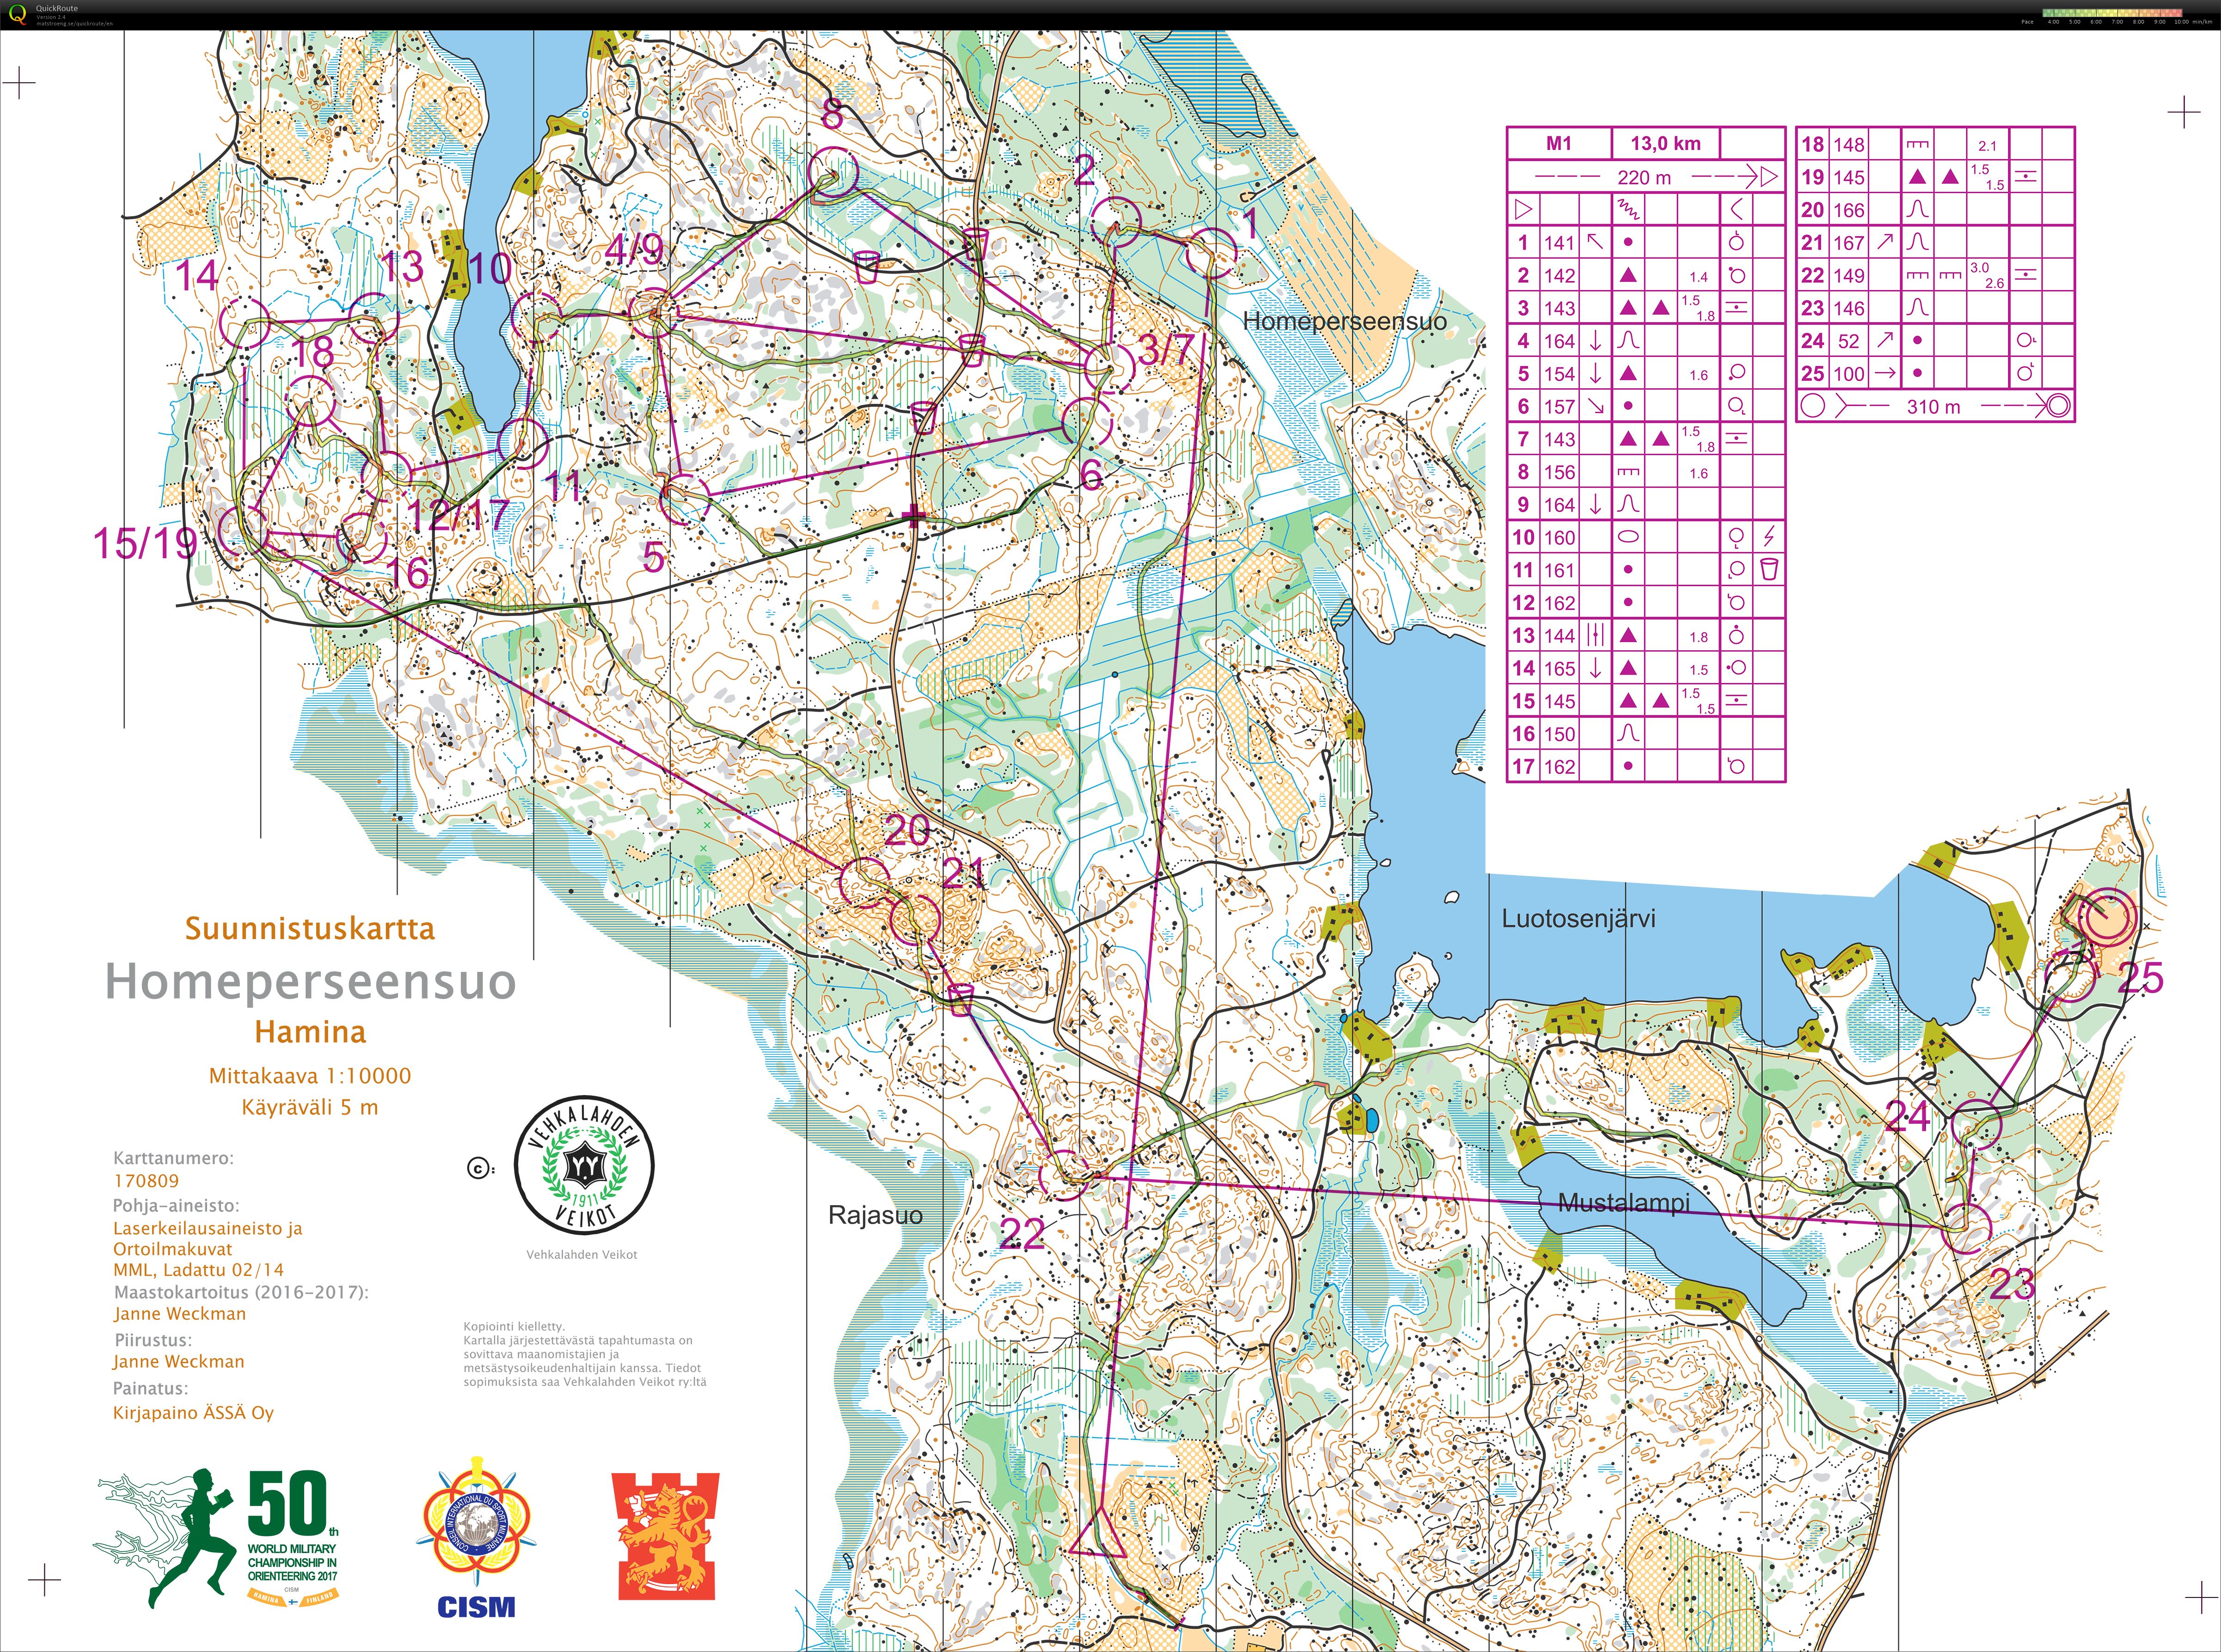 CISM World Military Orienteering Championships | Long (13-06-2017)